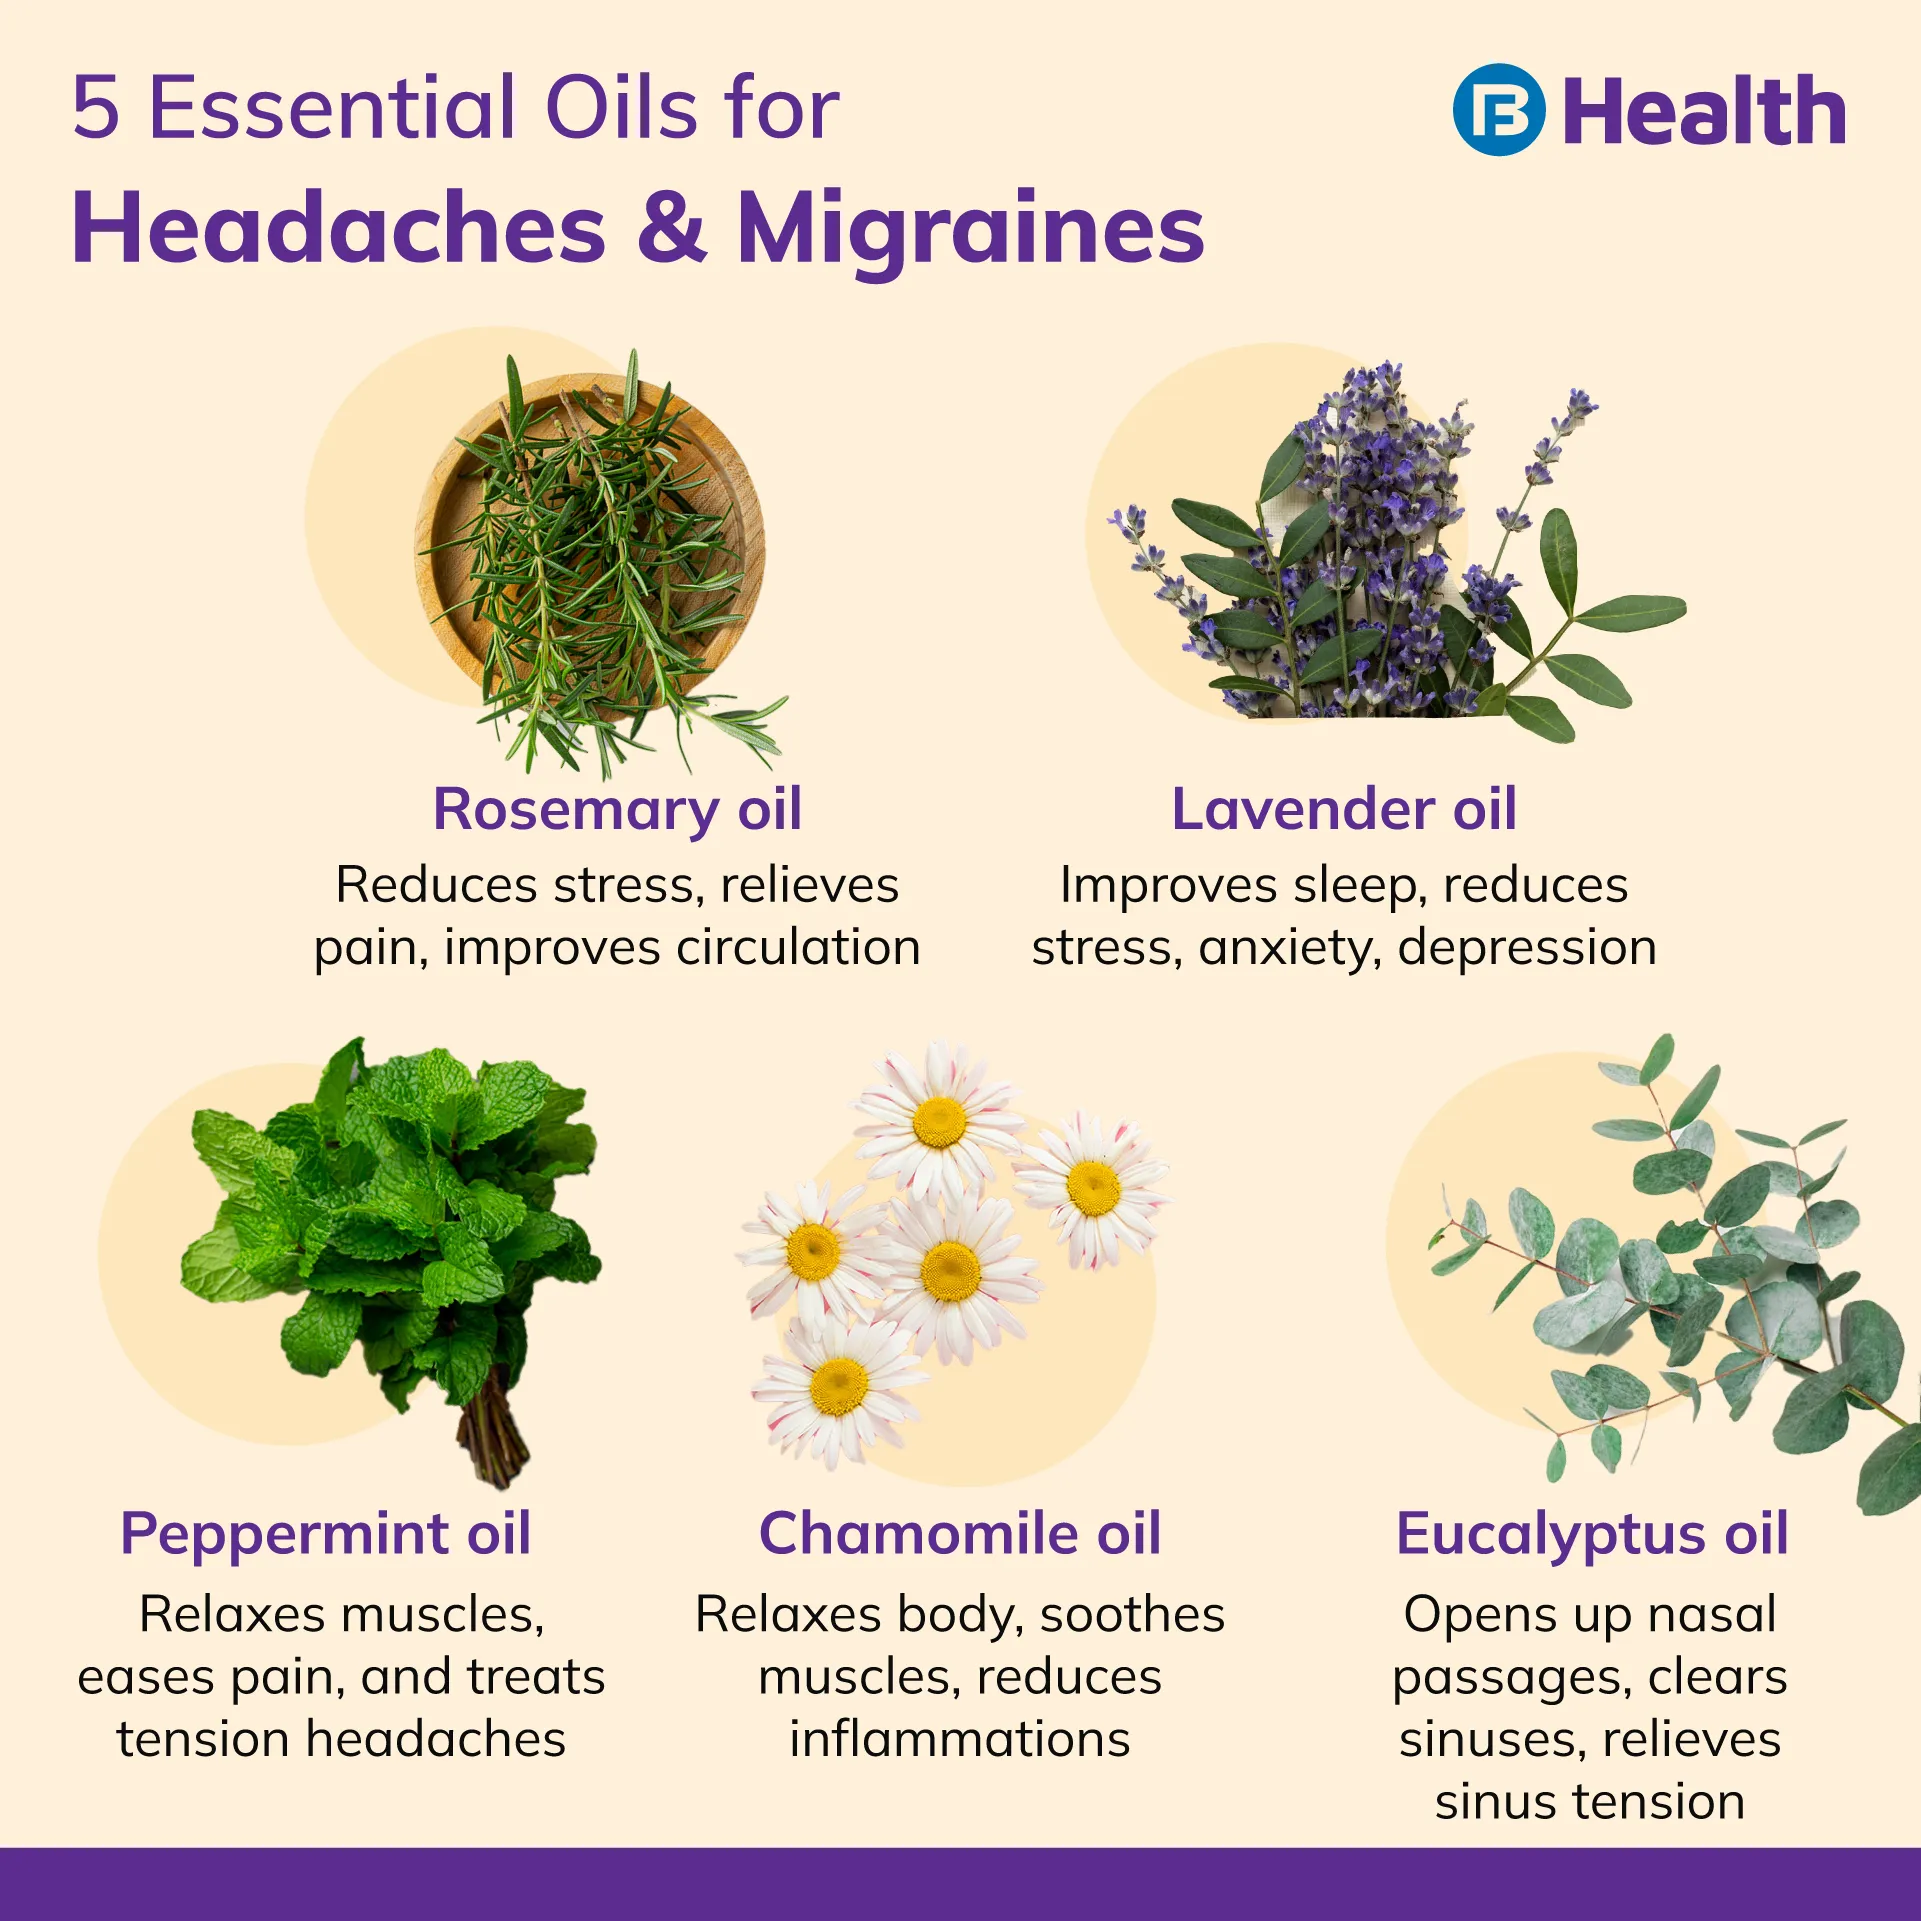 5 essential oils for headaches: Which oils work and how to use them